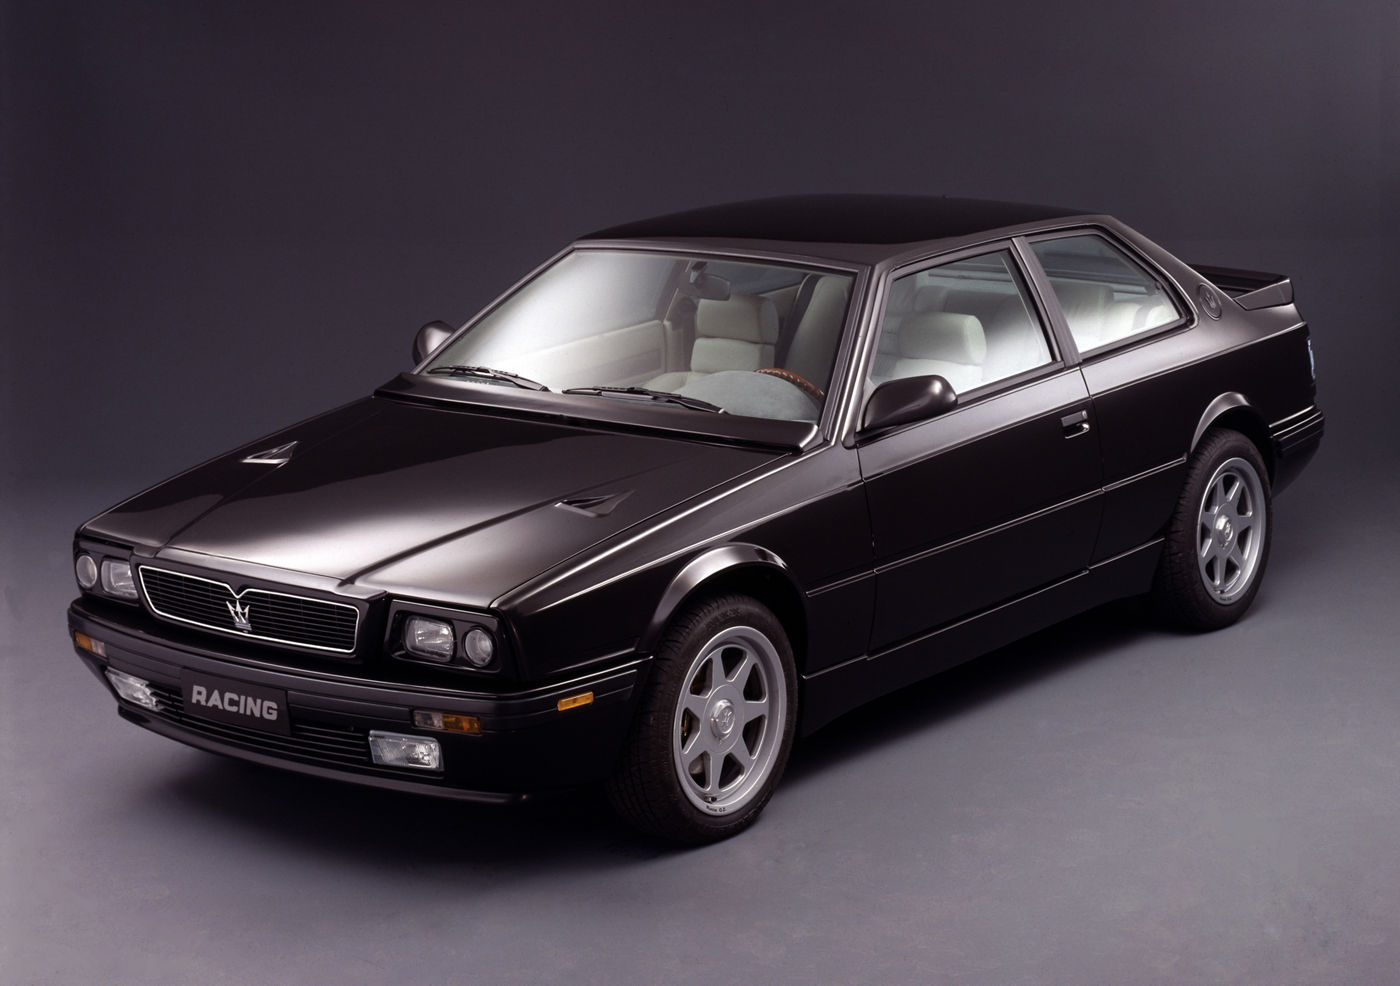 1990 Maserati Racing - exterior view of the classic car in black